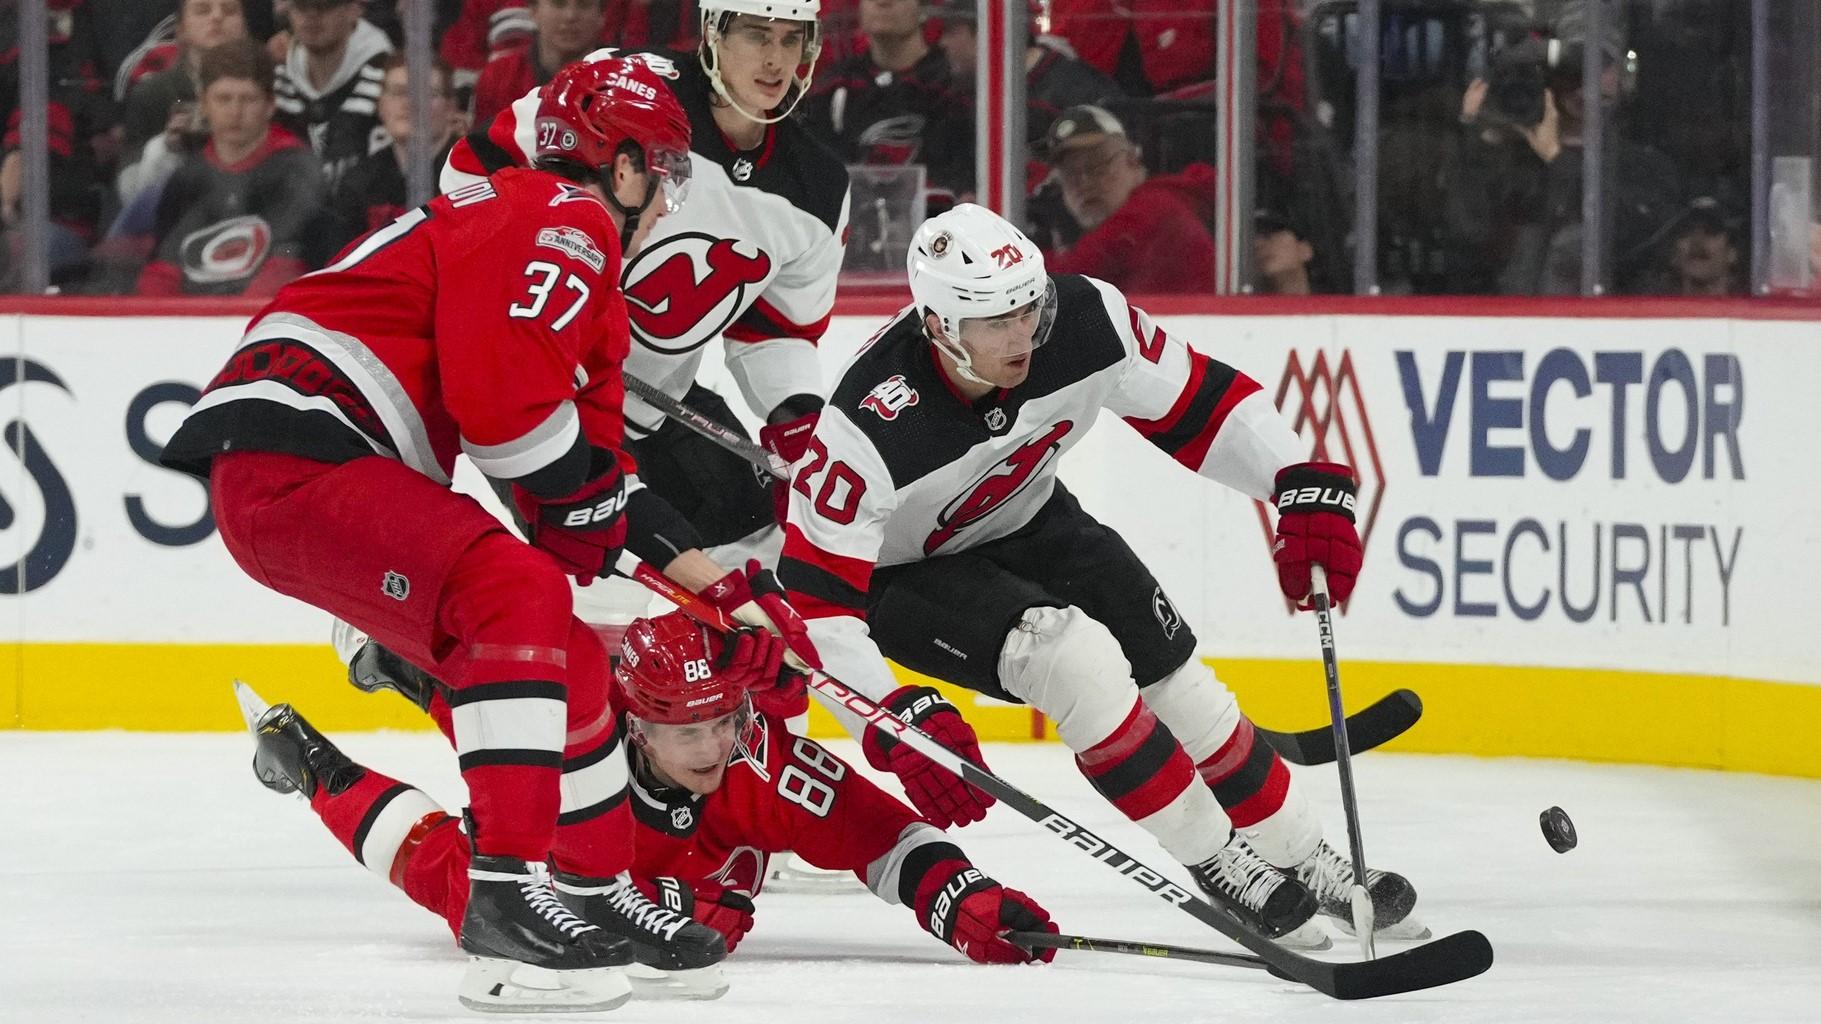 Dec 20, 2022; Raleigh, North Carolina, USA; Carolina Hurricanes center Martin Necas (88) and right wing Andrei Svechnikov (37) battle for the puck against New Jersey Devils center Michael McLeod (20) during the second period at PNC Arena. / James Guillory-USA TODAY Sports